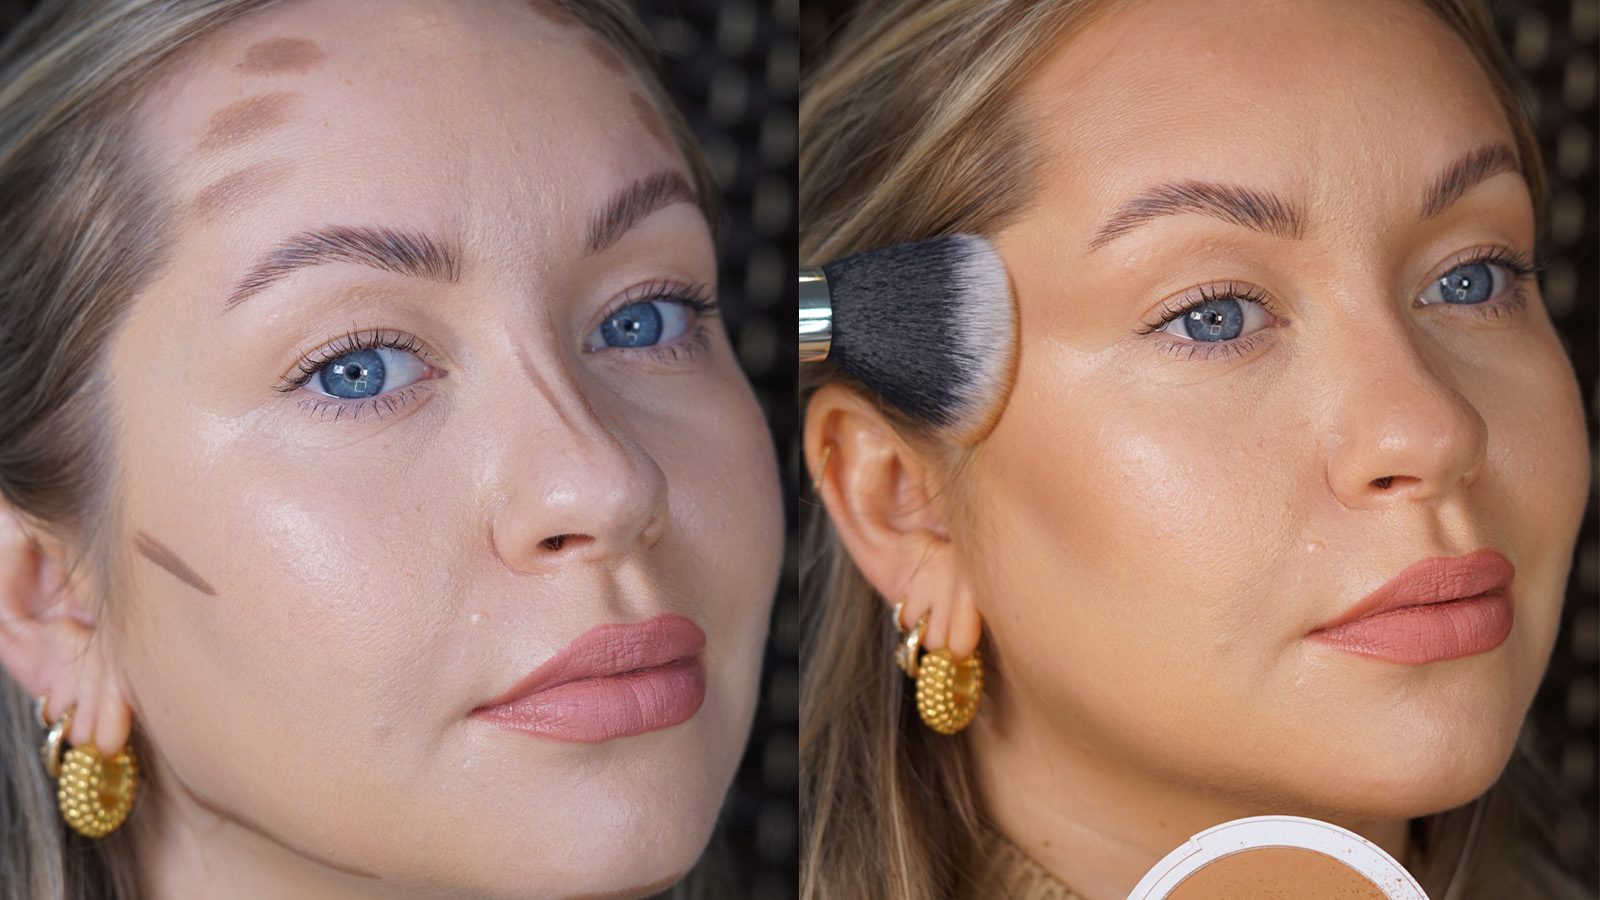 How To Contour - Beauty Bay Edited